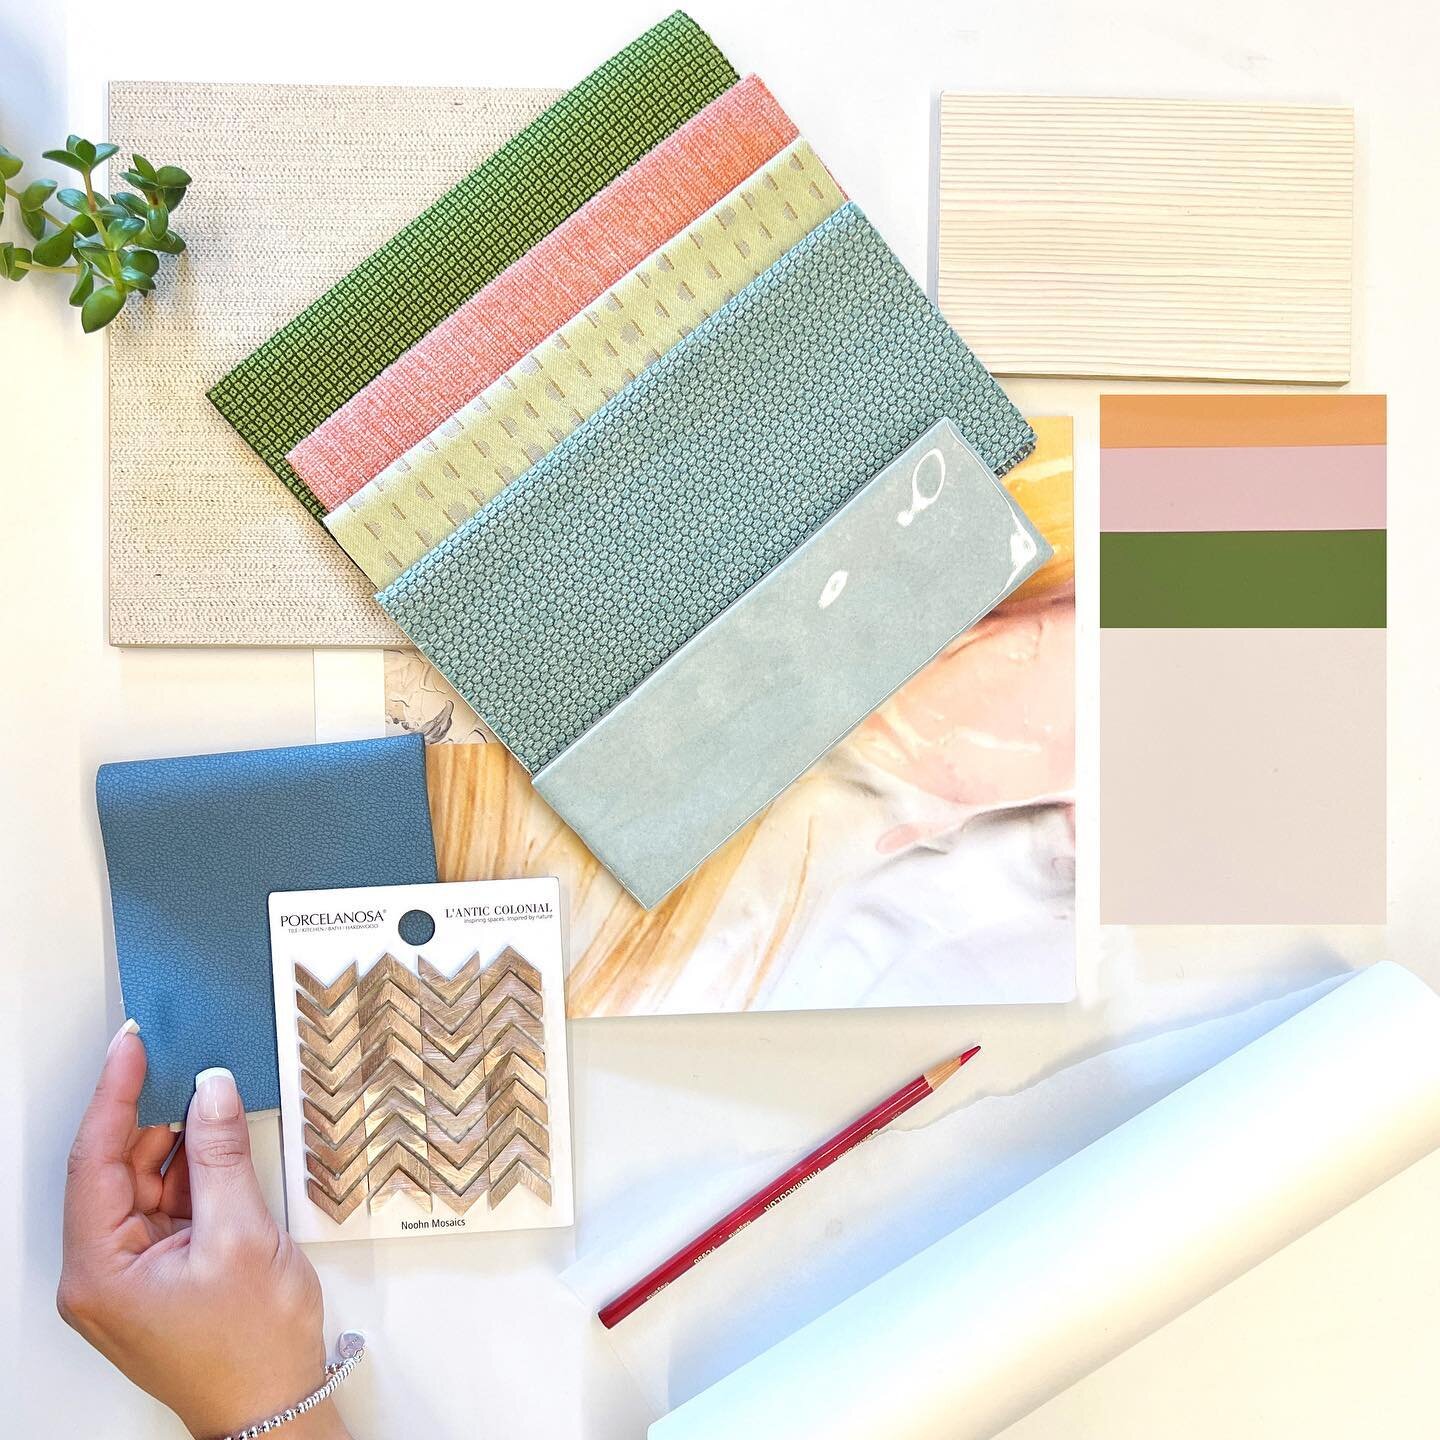 Spring is in the air 🌺 Uplifting pastel colors, small patterned textiles and tiles in complimentary shades layered against a watercolor inspired mural make up this vibrant finish palette. Enjoy the warm weather everyone!